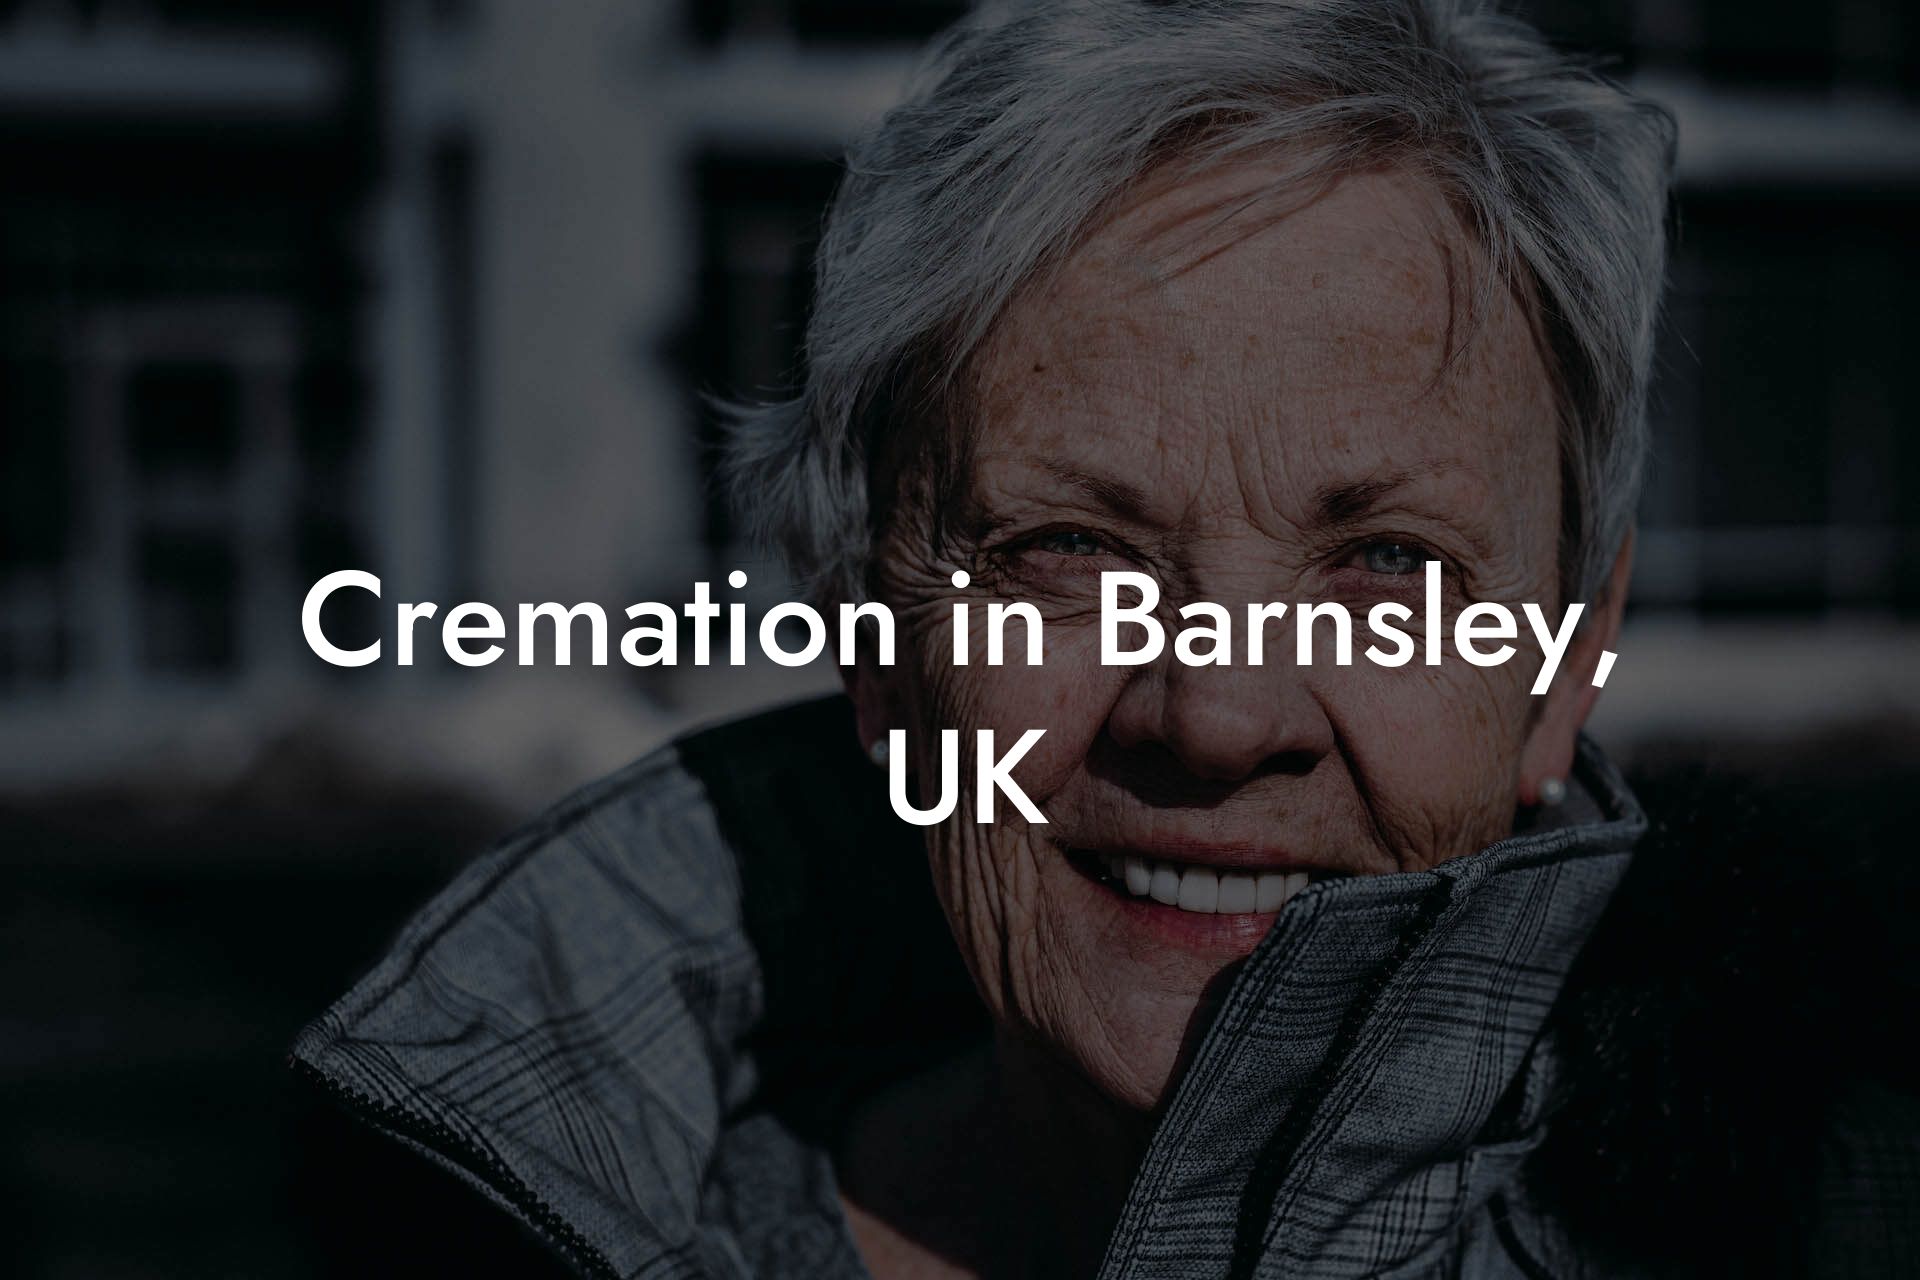 Cremation in Barnsley, UK